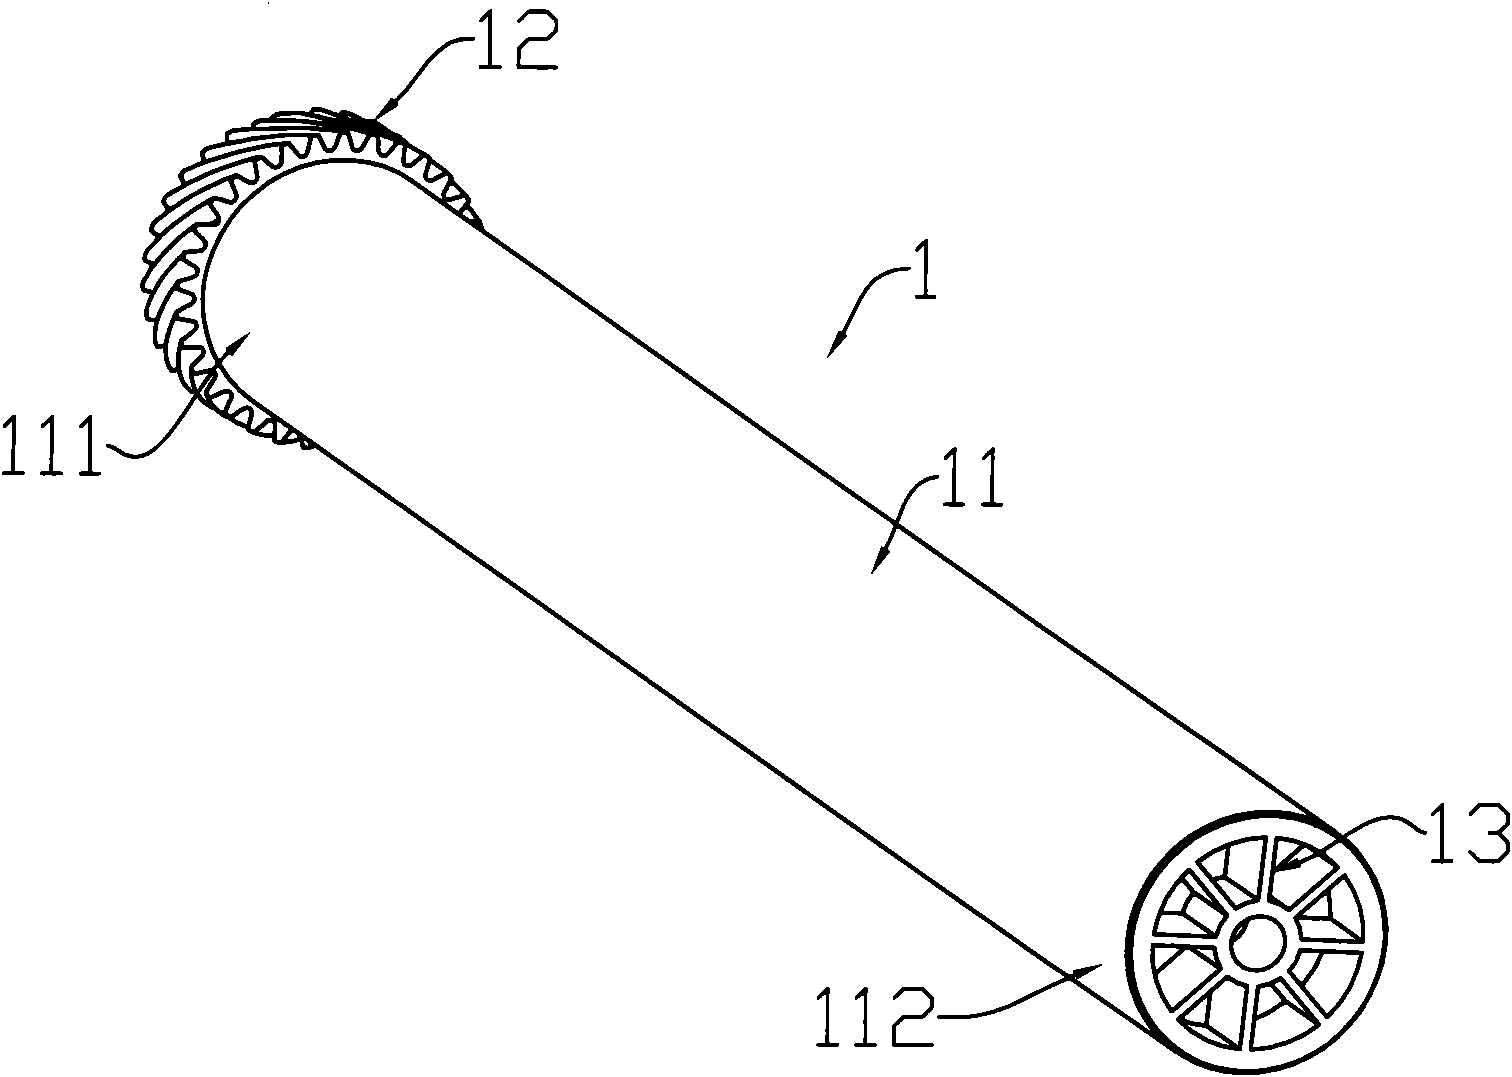 Method for remanufacturing photosensitive drum into another photosensitive drum